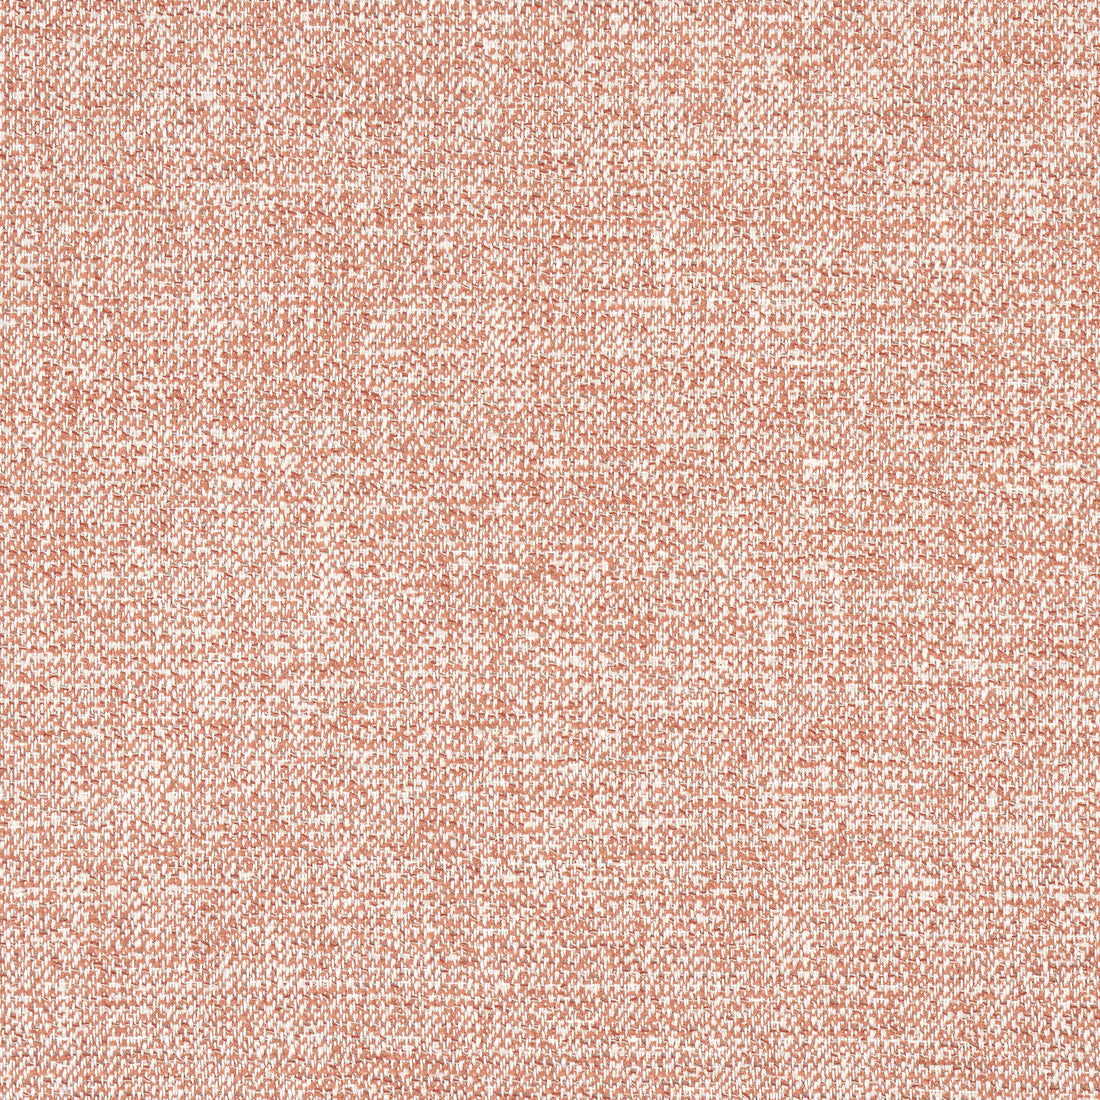 Calais fabric in rouge color - pattern number W8799 - by Thibaut in the Haven Textures collection